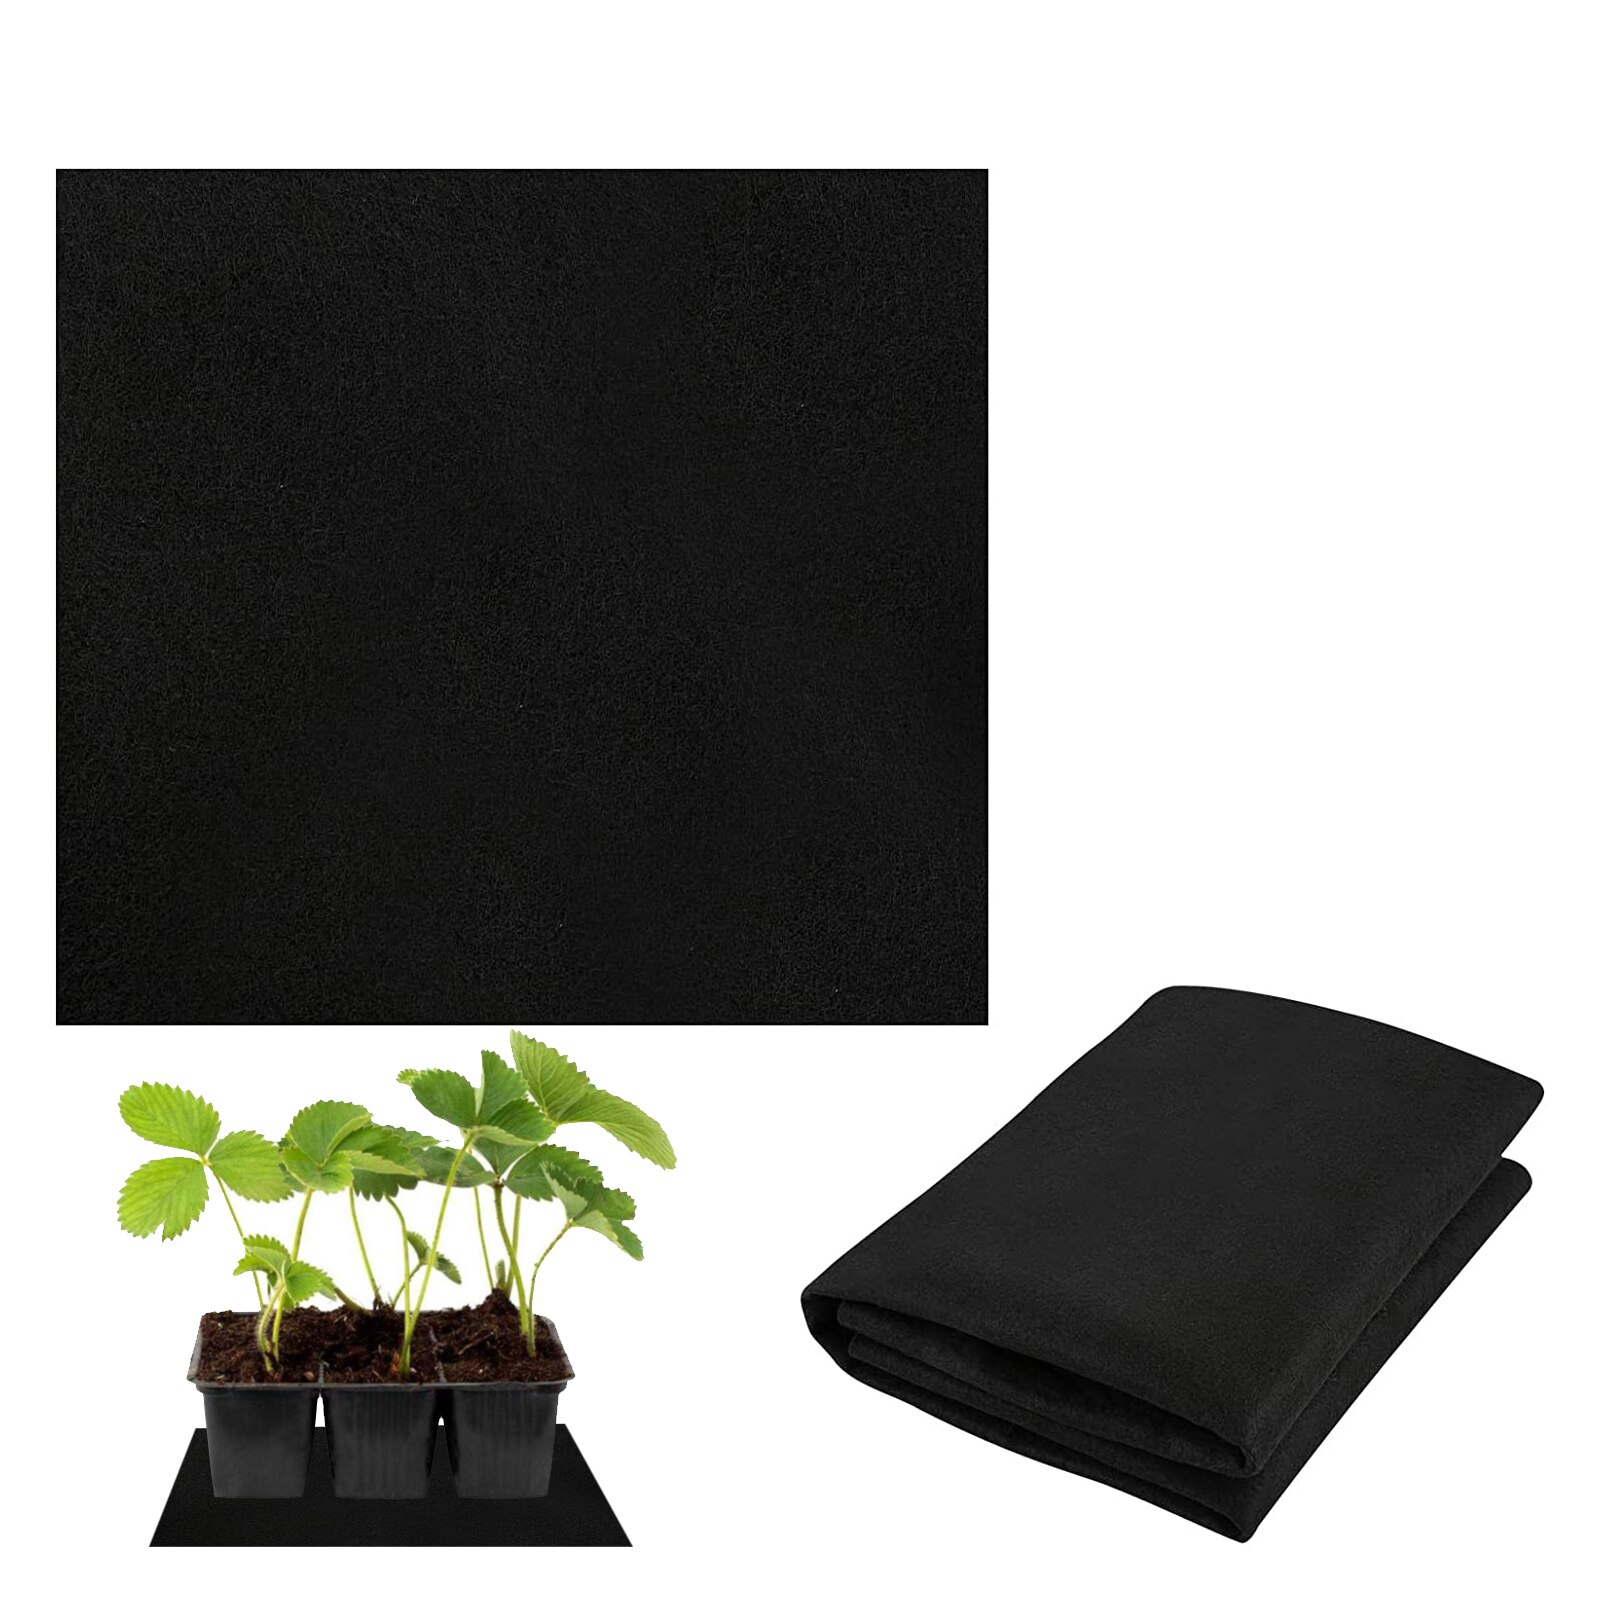 Plant Capillary Matting For Greenhouse Automatic Plant Watering System Indoor Plant Water Retention Irrigation Capillary Mat for